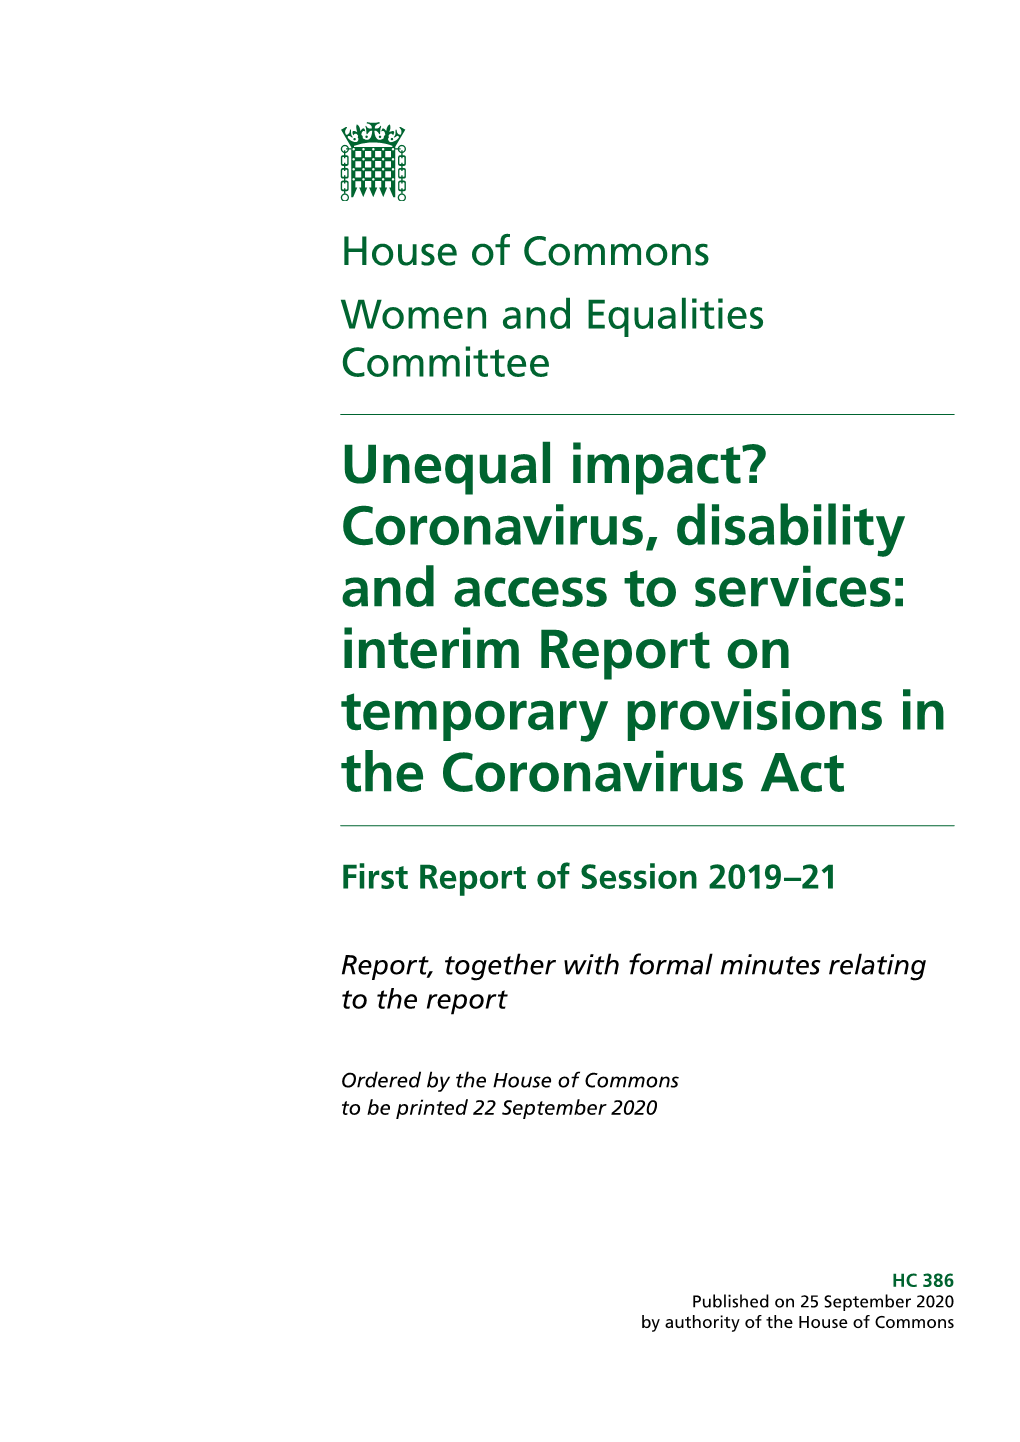 Unequal Impact? Coronavirus, Disability and Access to Services: Interim Report on Temporary Provisions in the Coronavirus Act